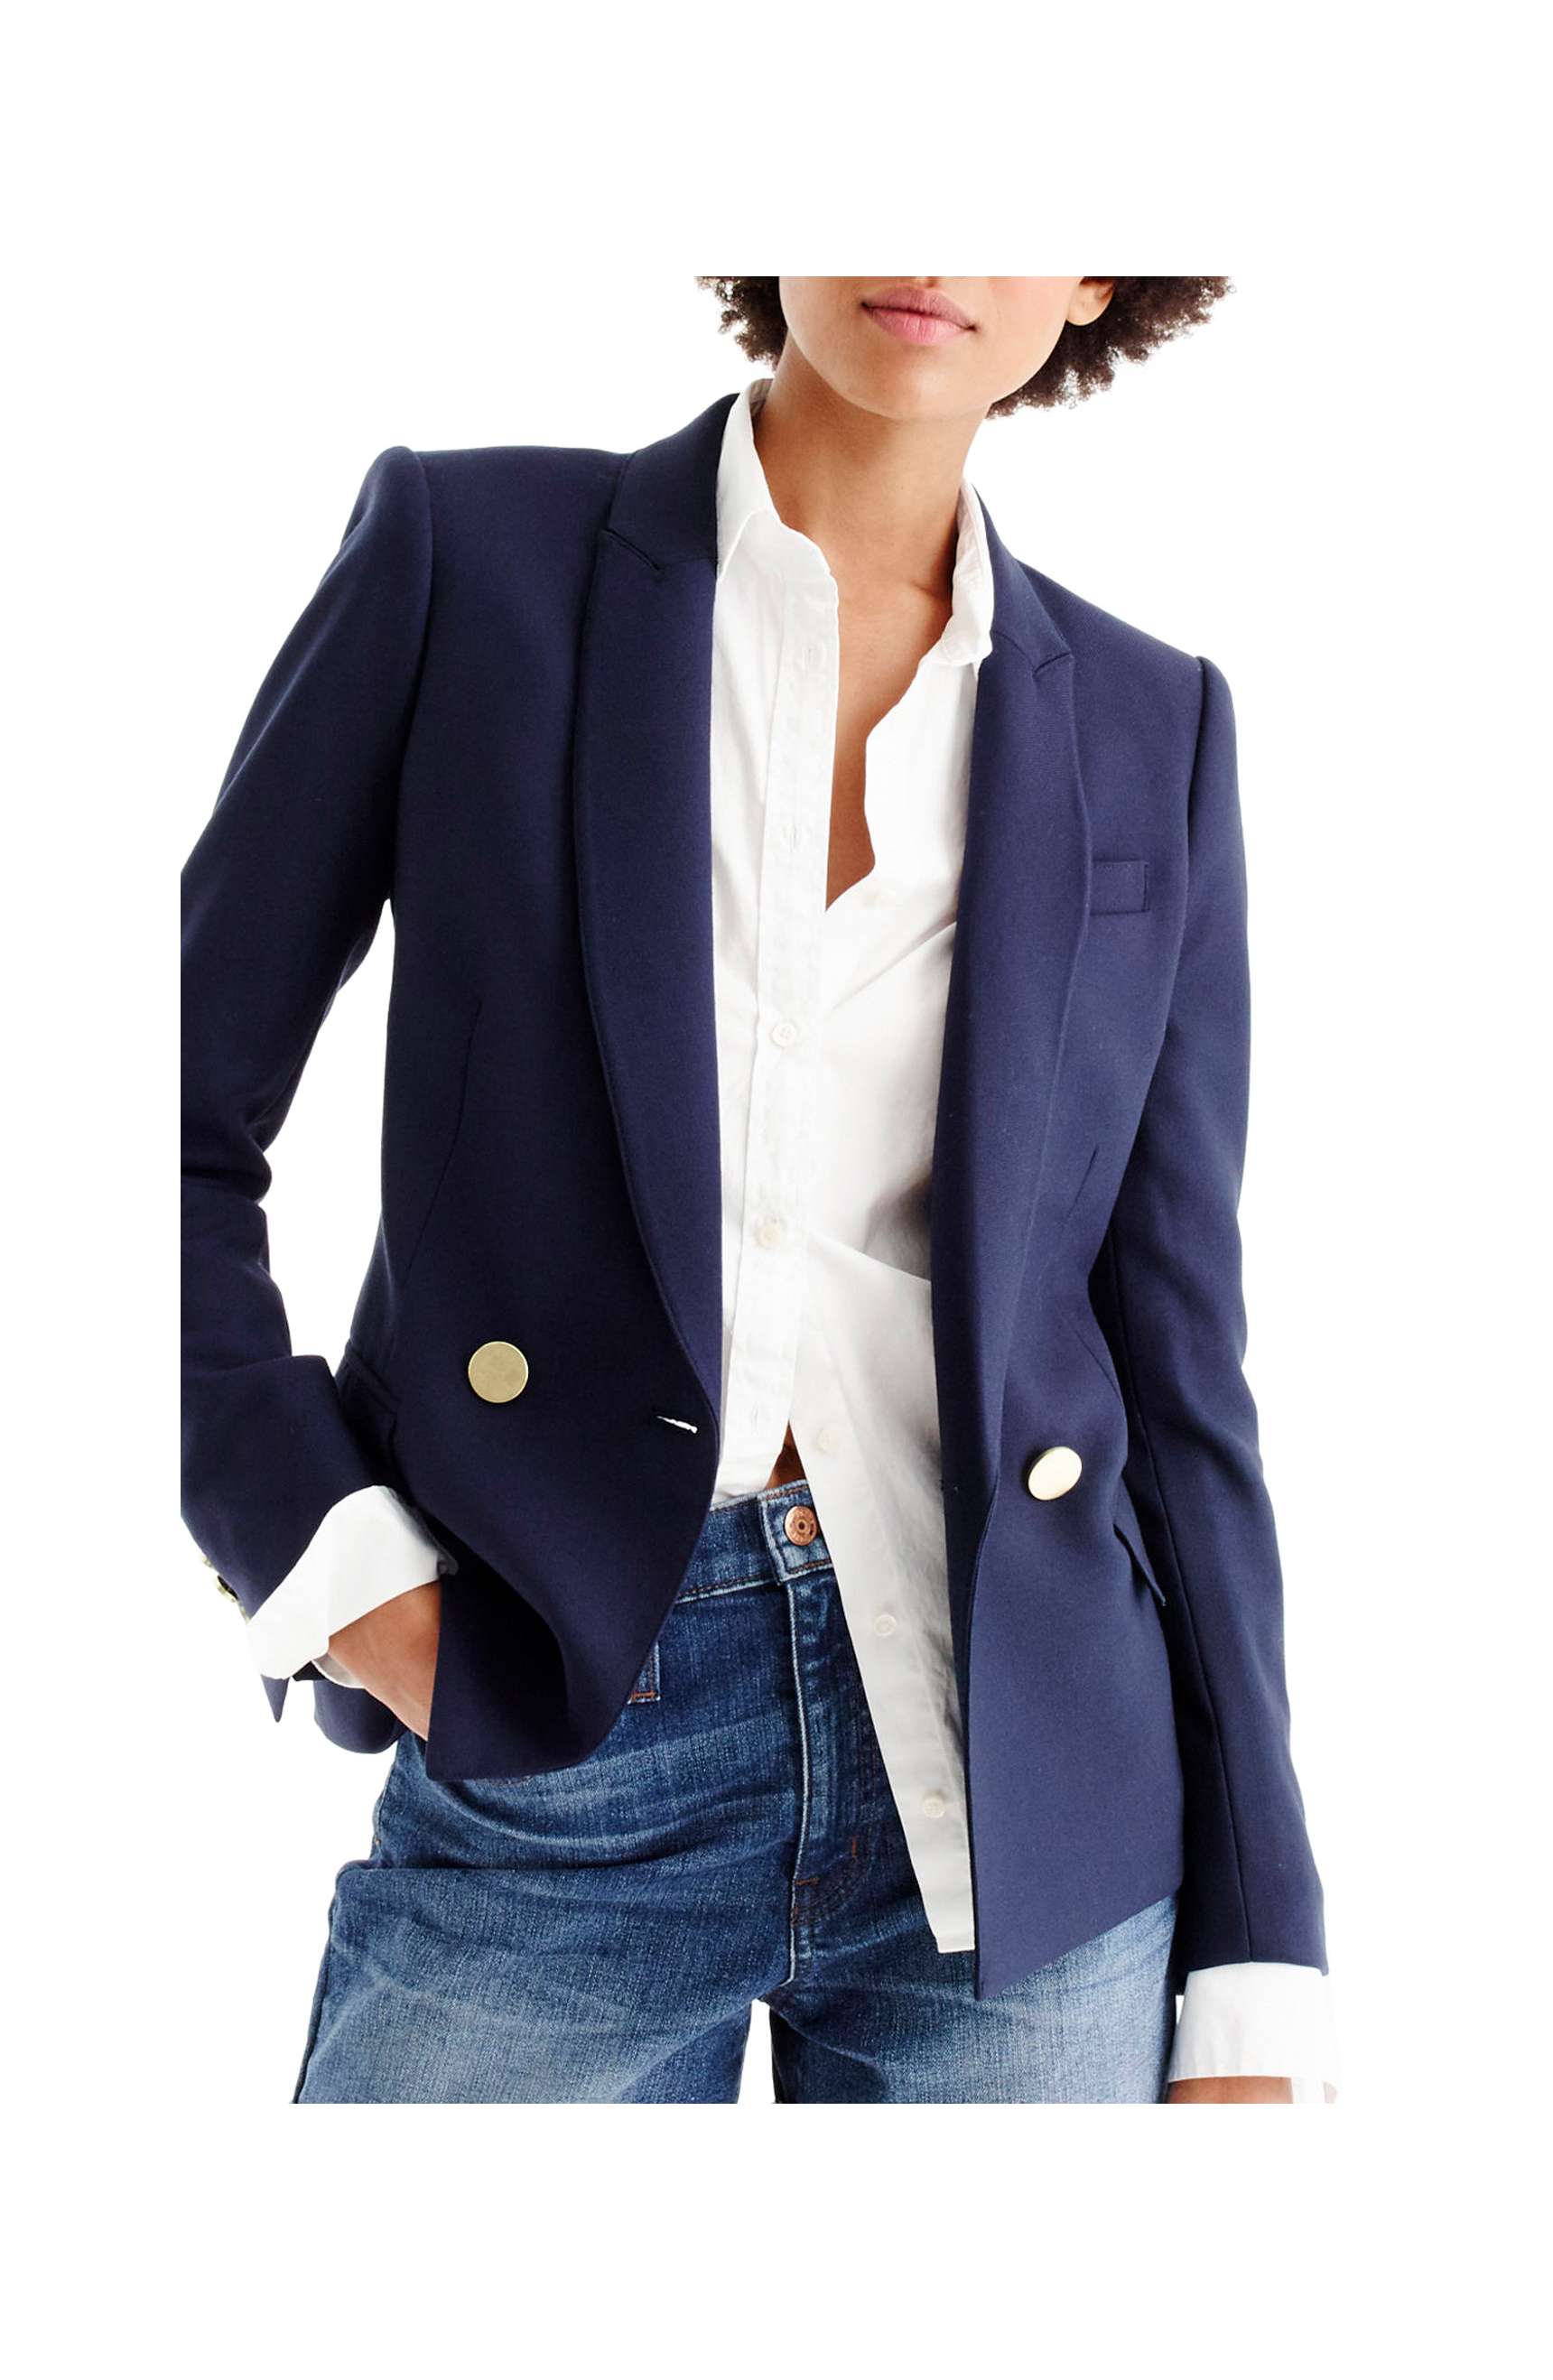 5 JACKETS YOU NEED LIKE RIGHT NOW — by CHLOE WEN